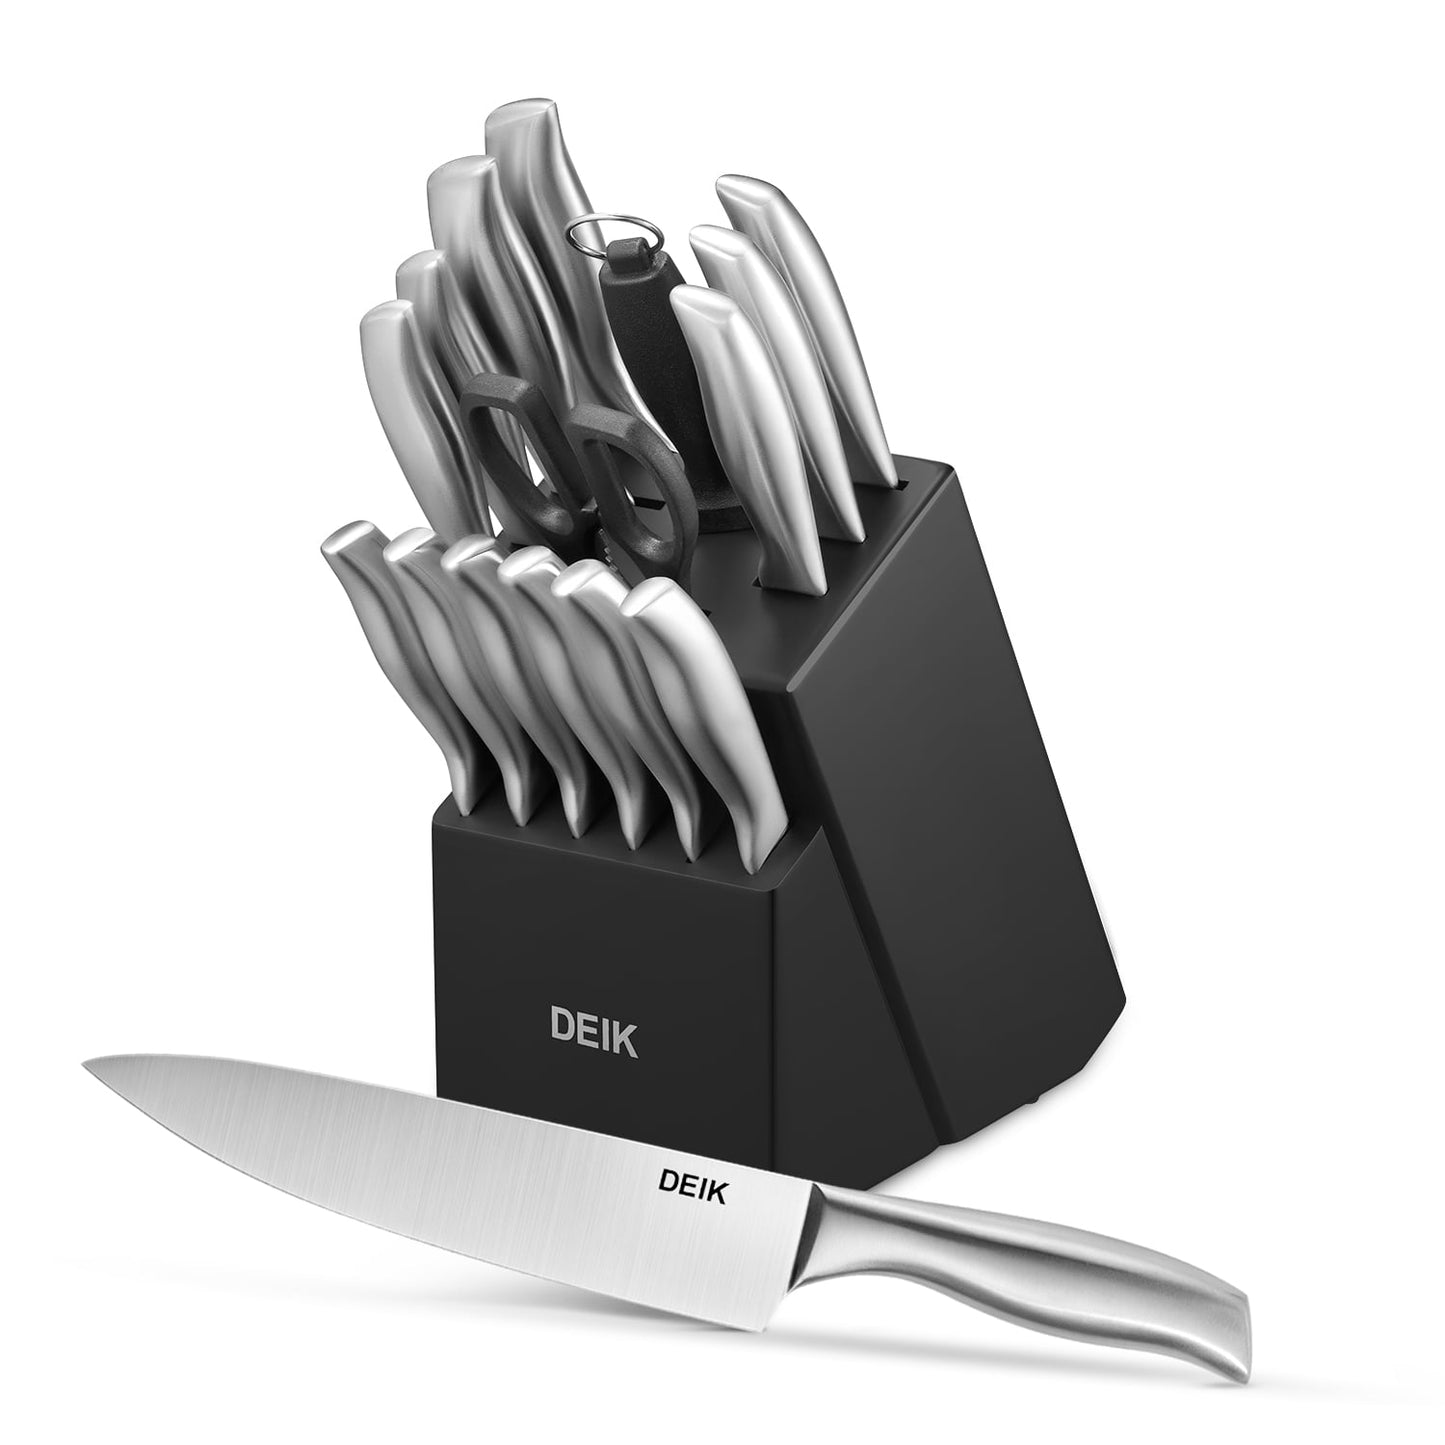 Deik Knife Set , 16 Pieces Stainless Steel Hollow Handle Kitchen Cutlery Set with Block